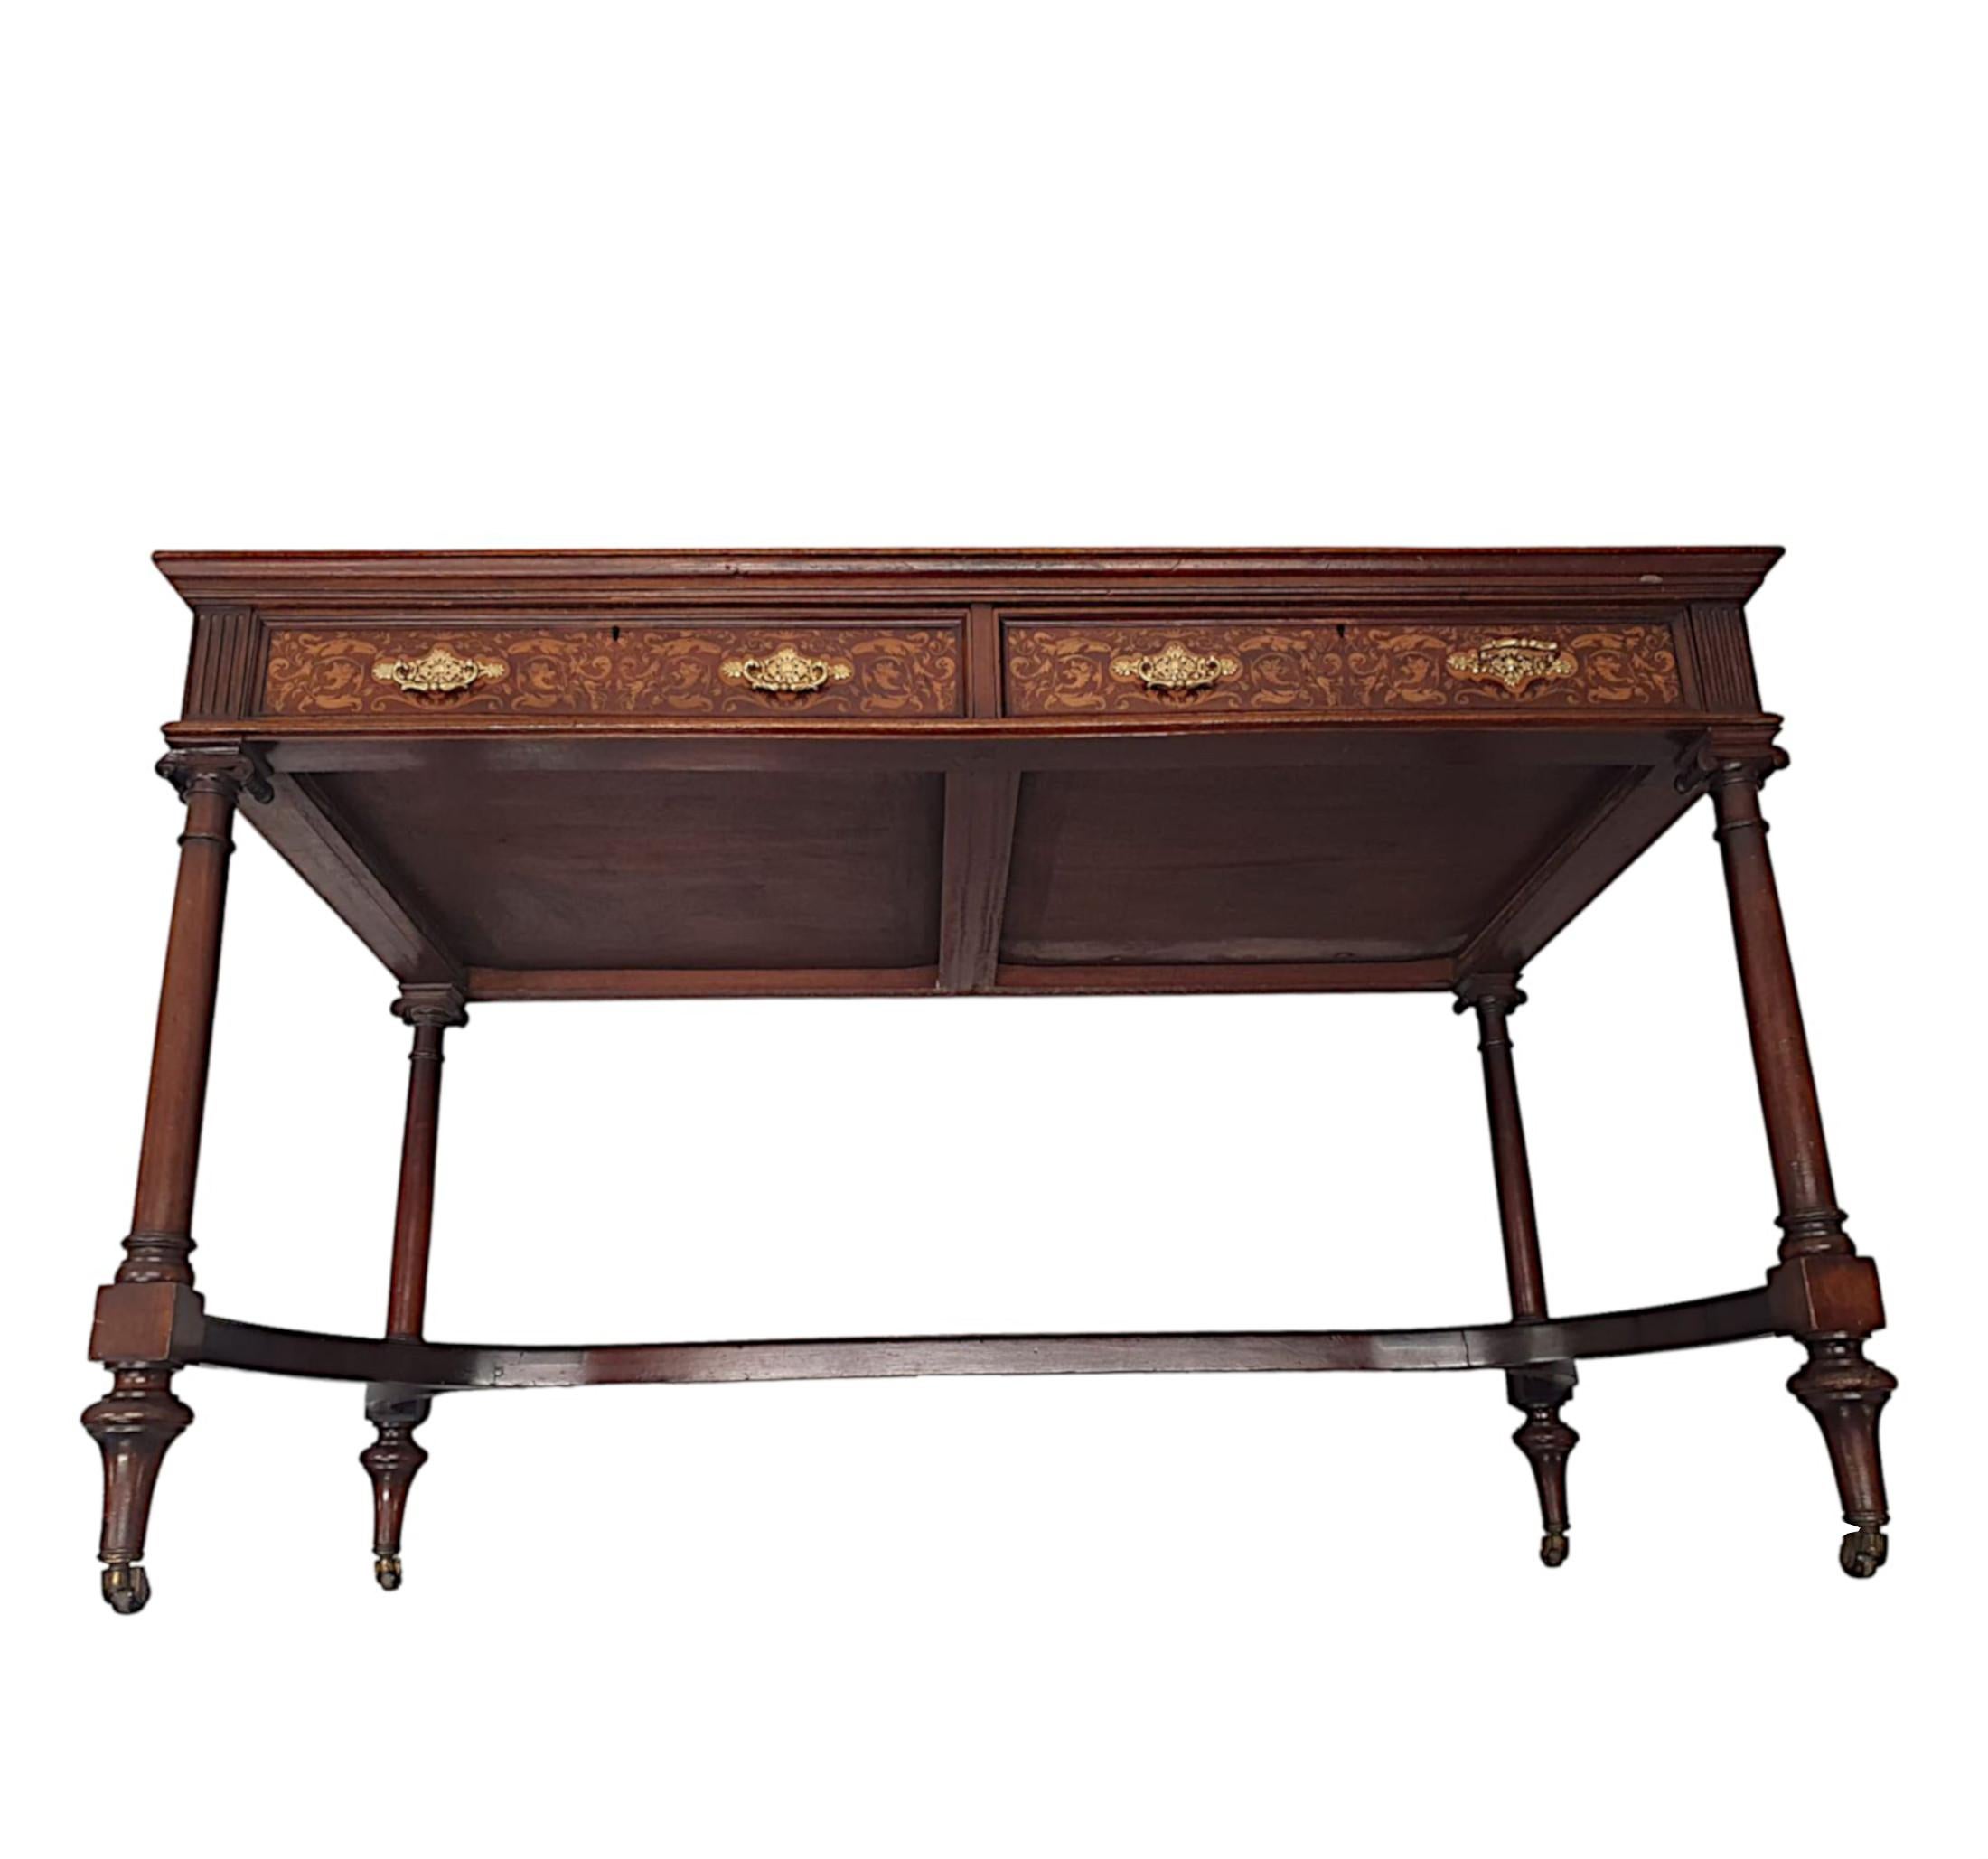 20th Century A Fabulous Edwardian Desk attributed to Edward and Roberts For Sale